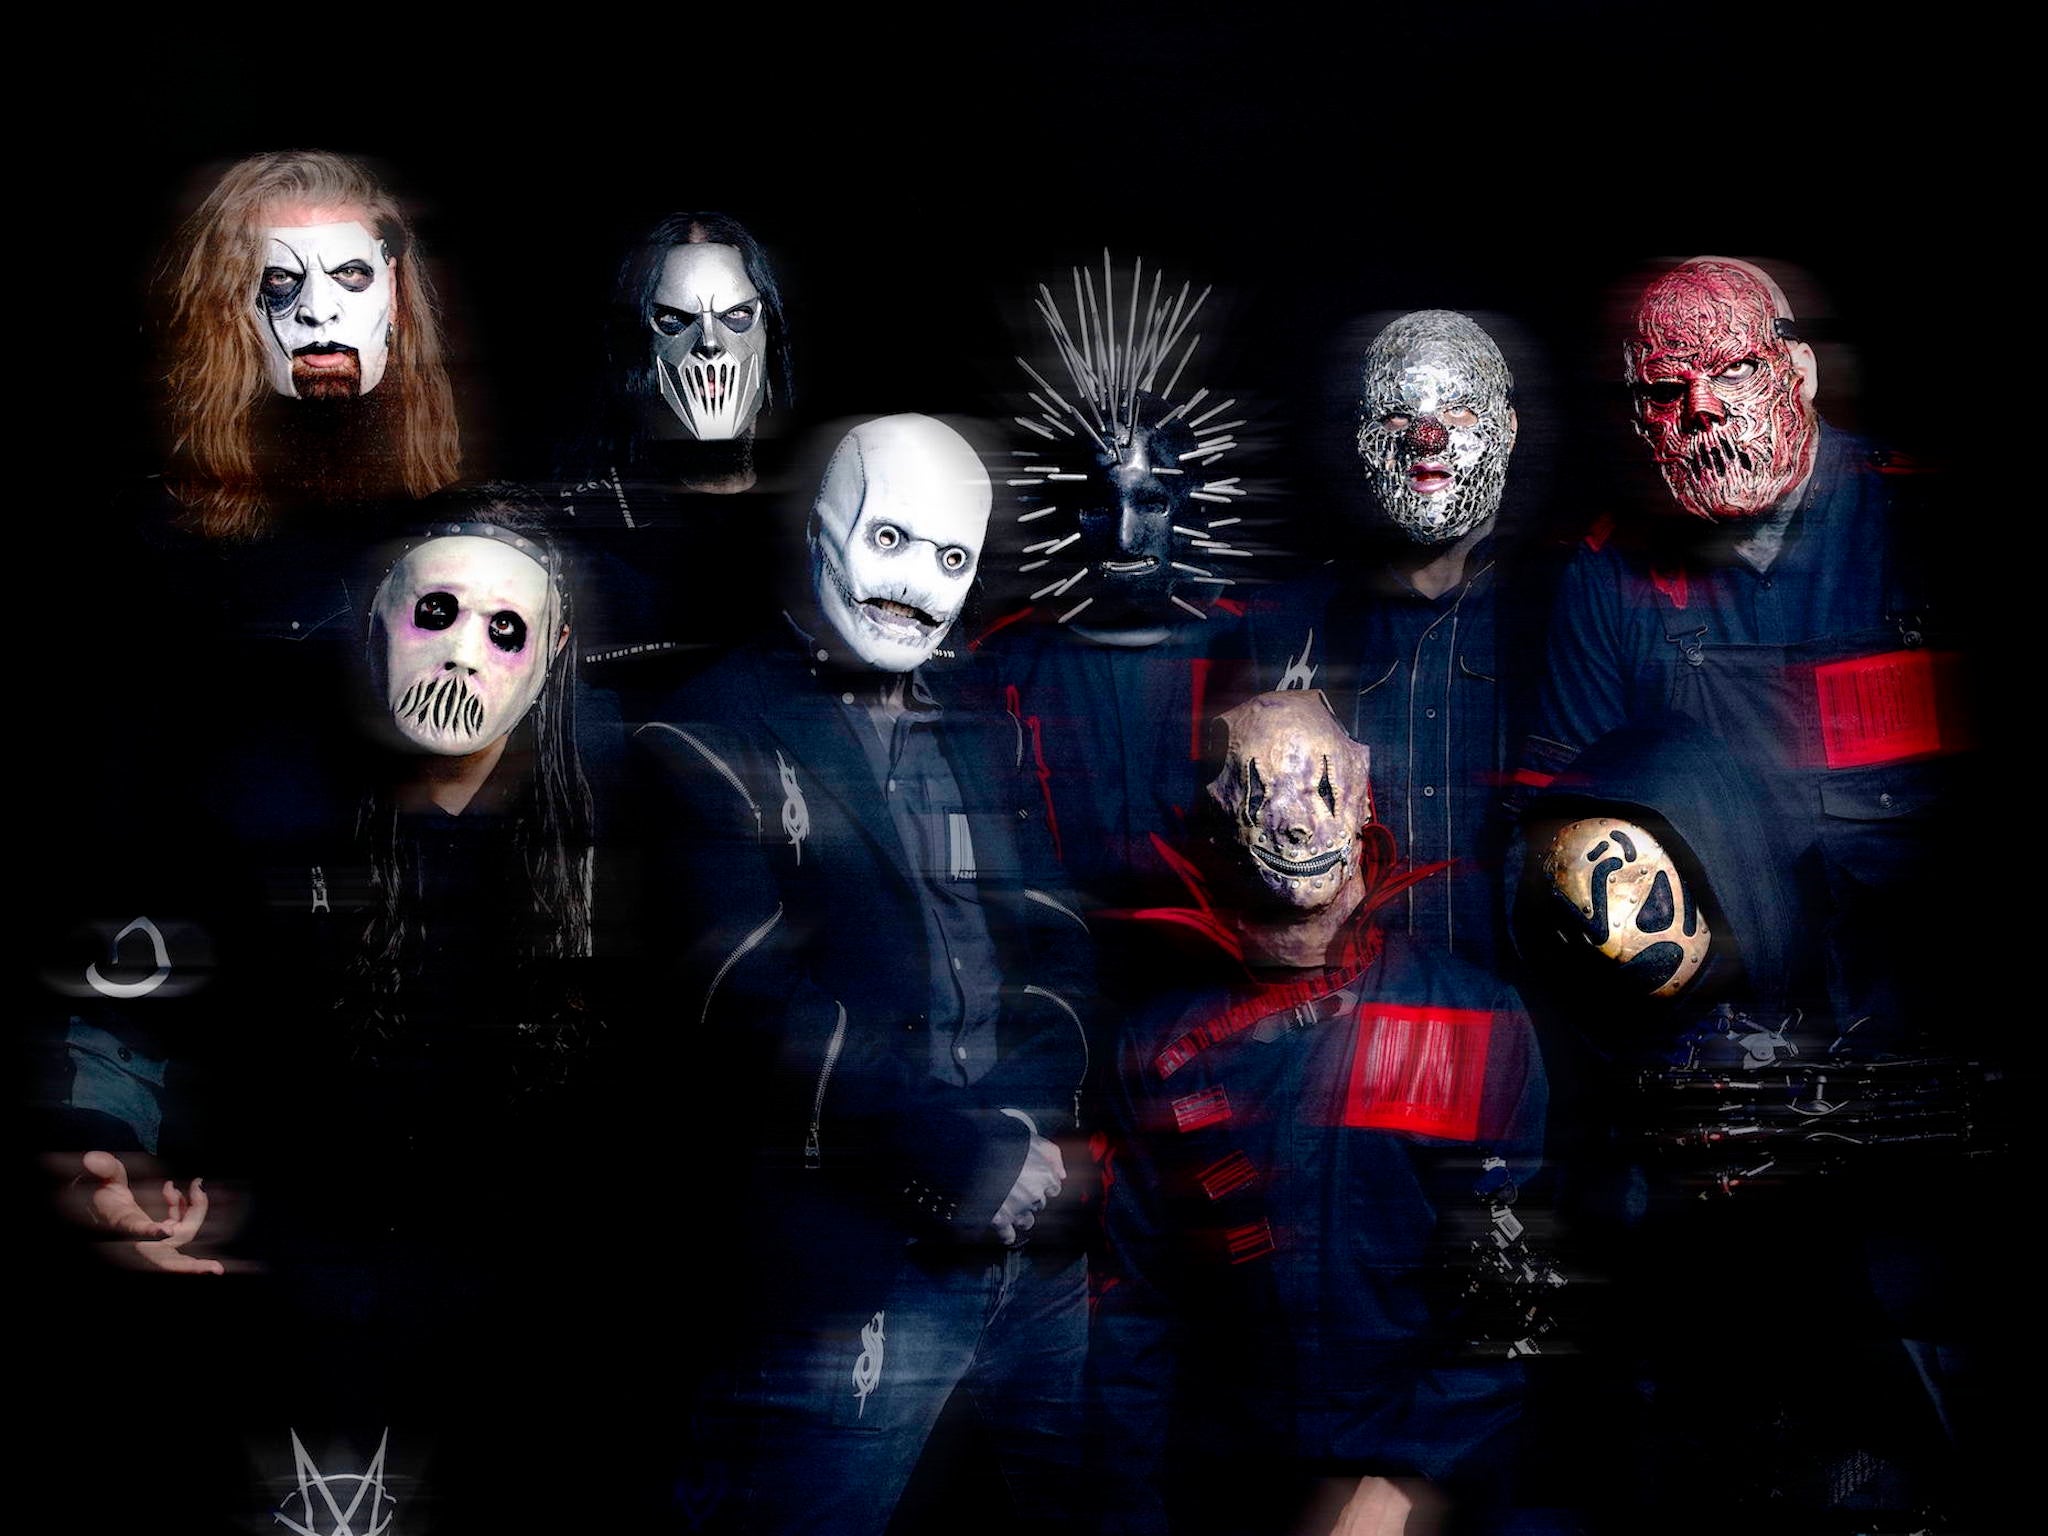 Slipknot S Shawn Crahan ‘i Know What Real Evil Is Now… My Past Problems Are Minuscule Compared